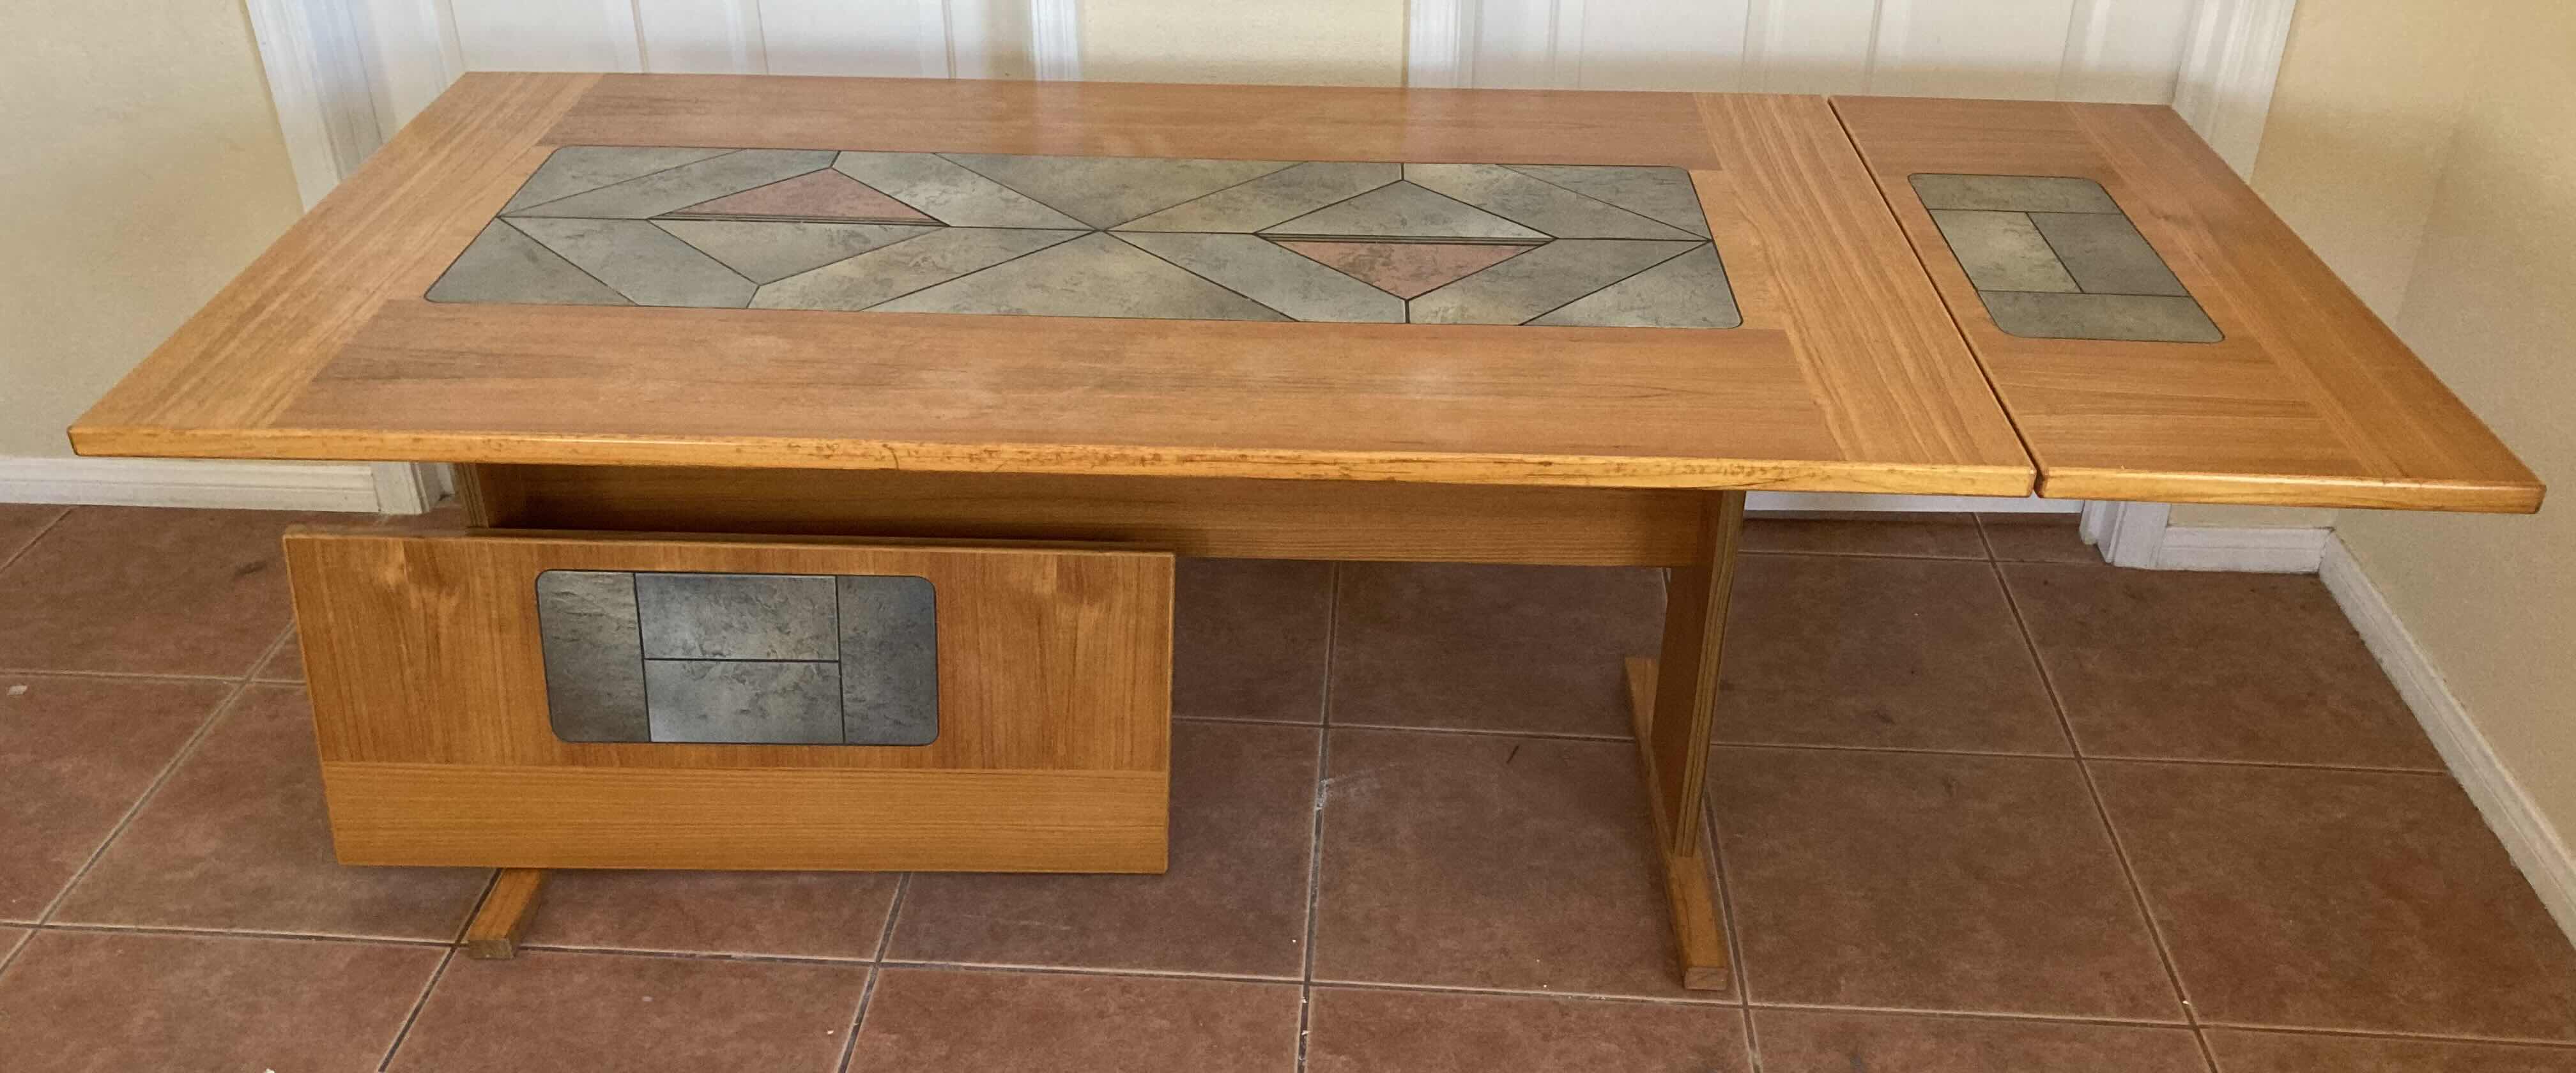 Photo 1 of SOUTHWESTERN STYLE WOOD FINISH DINING TABLE W TILE TOP INLAY 63”-79” X 35.5” H28.5”